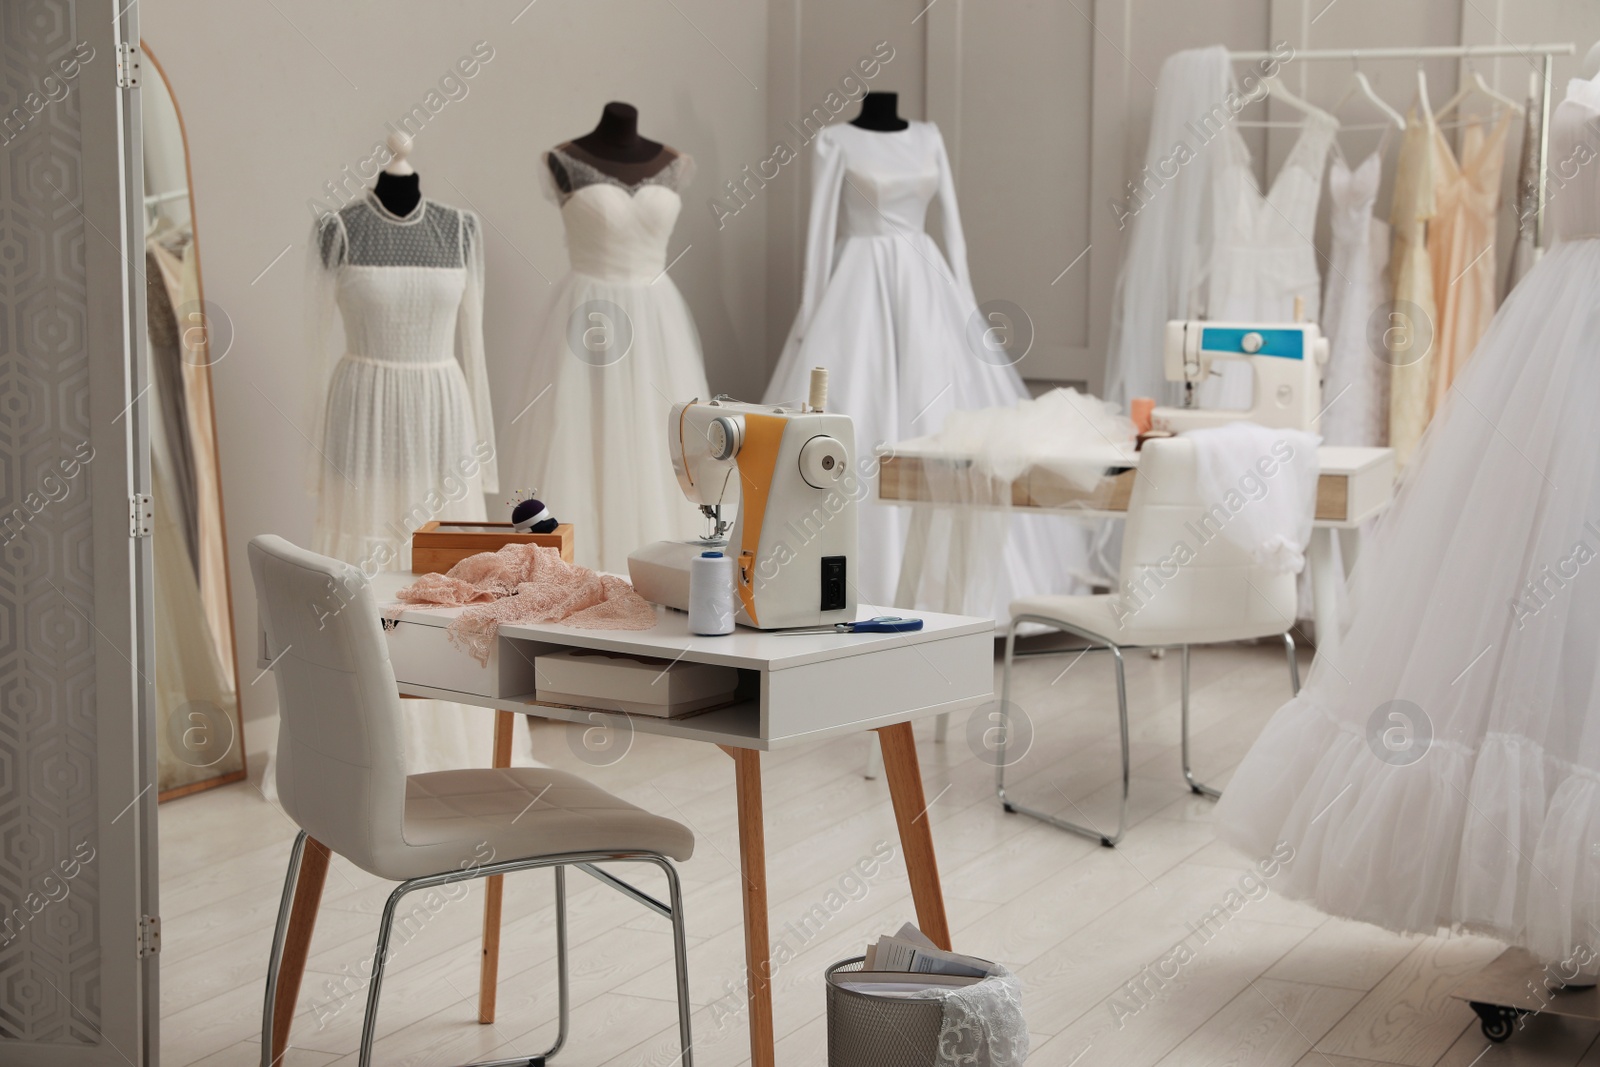 Photo of Dressmaking workshop interior with wedding dresses and equipment